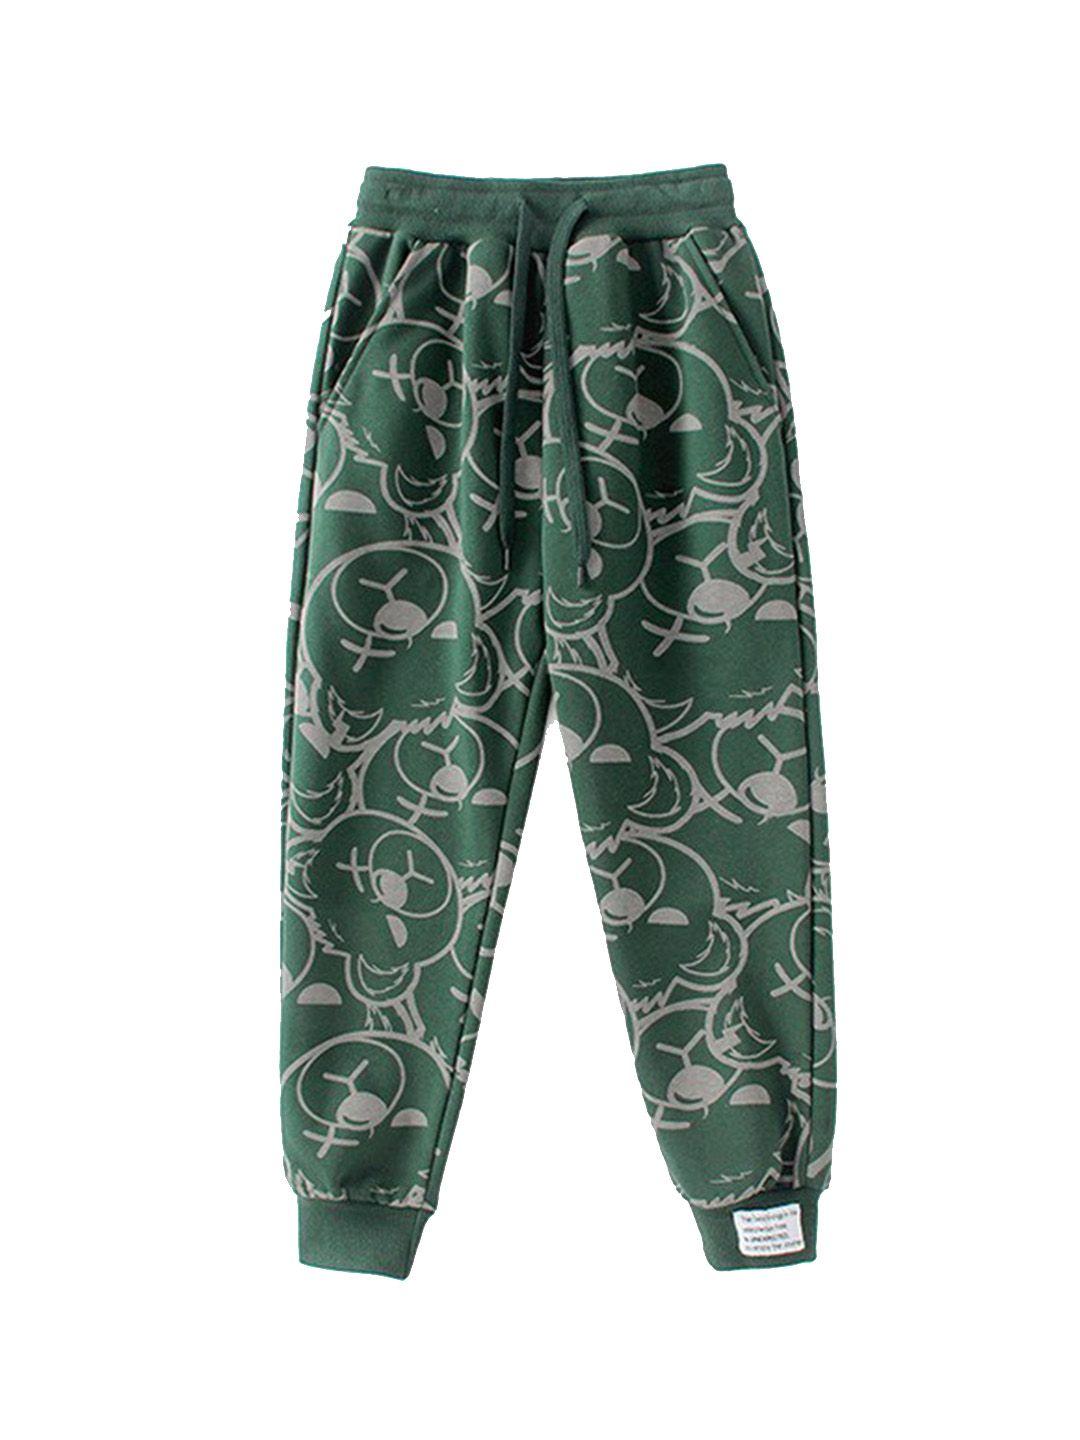 stylecast green boys conversational printed easy wash cotton jogger